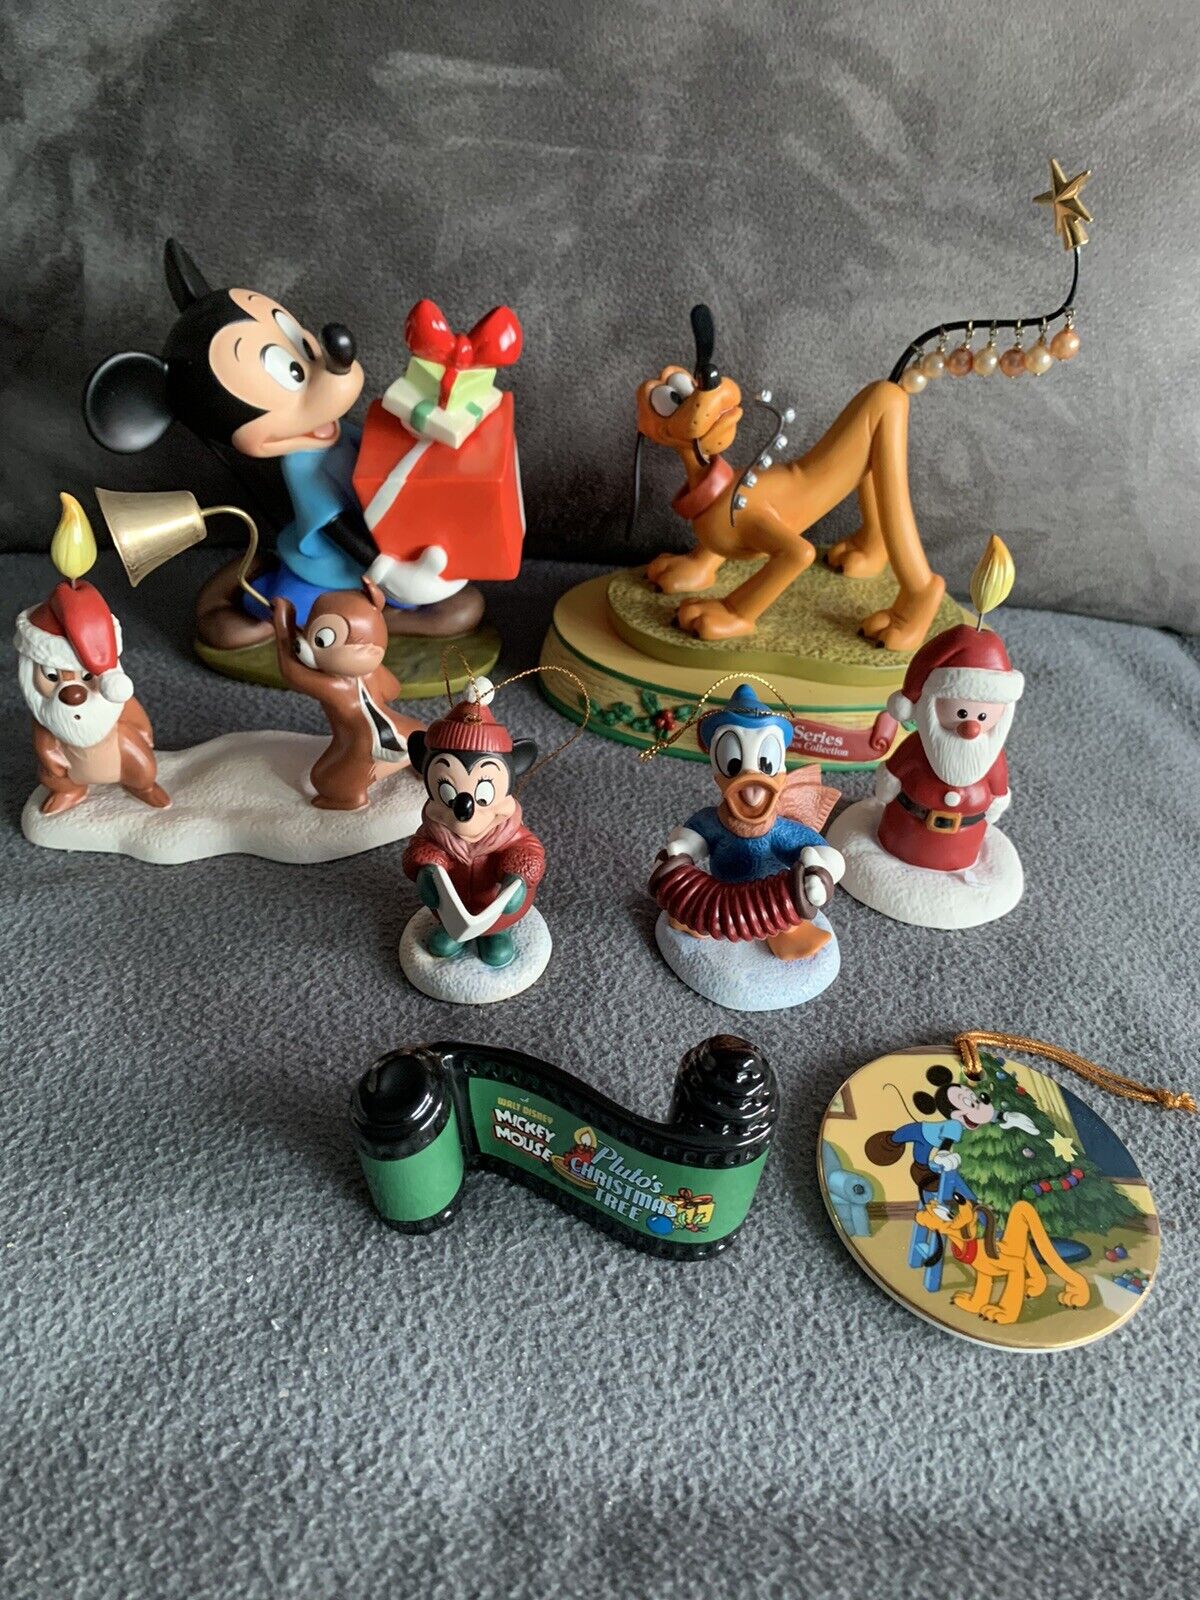 WDCC Pluto Christmas Tree Collection Pluto,Mickey,Minnie,Donald, Chip&Dale+,READ